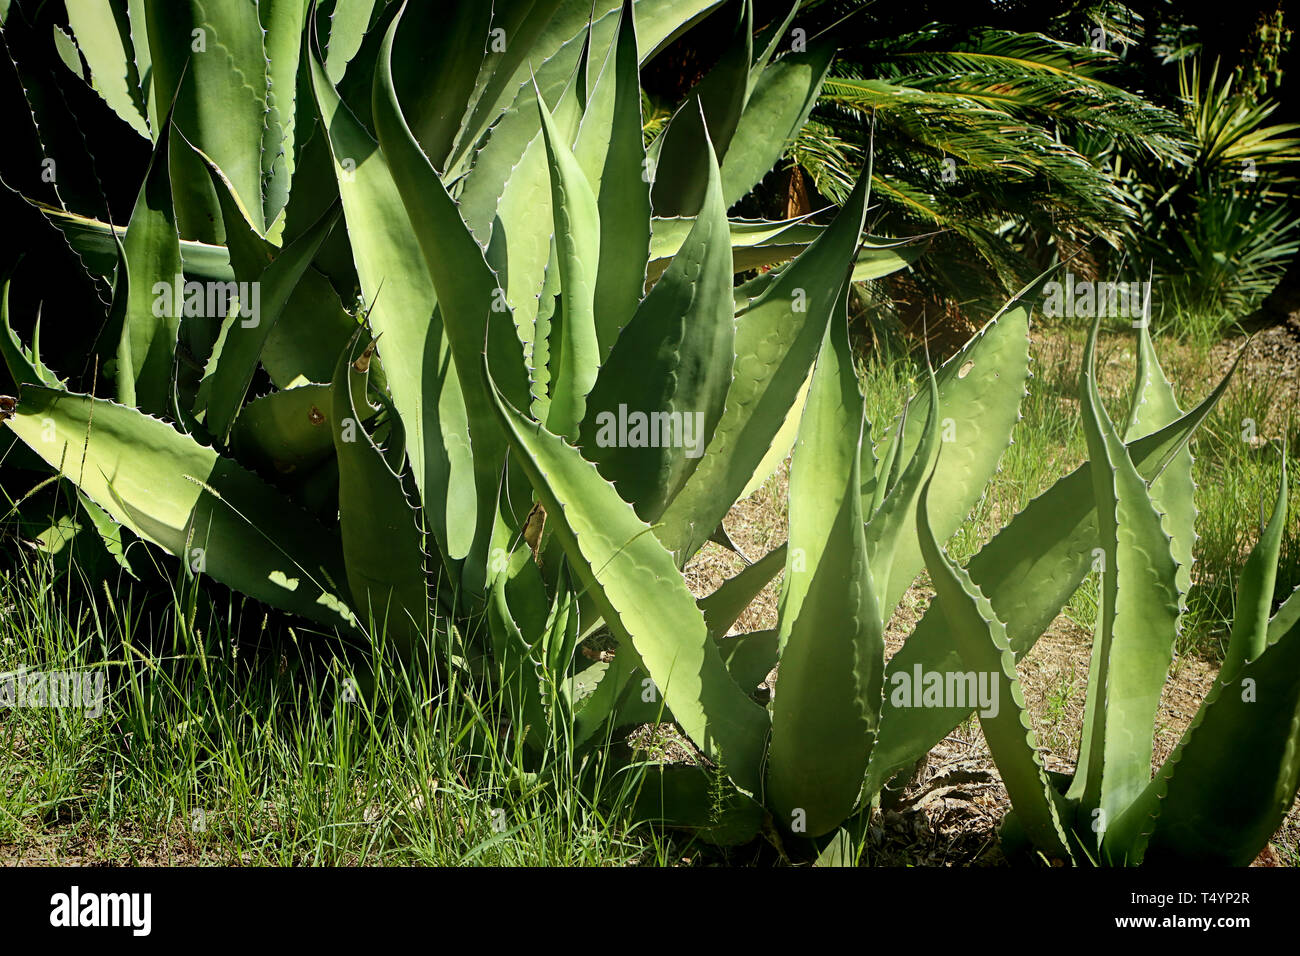 Mediterranean garden with agave plants and lush vegetation Stock Photo